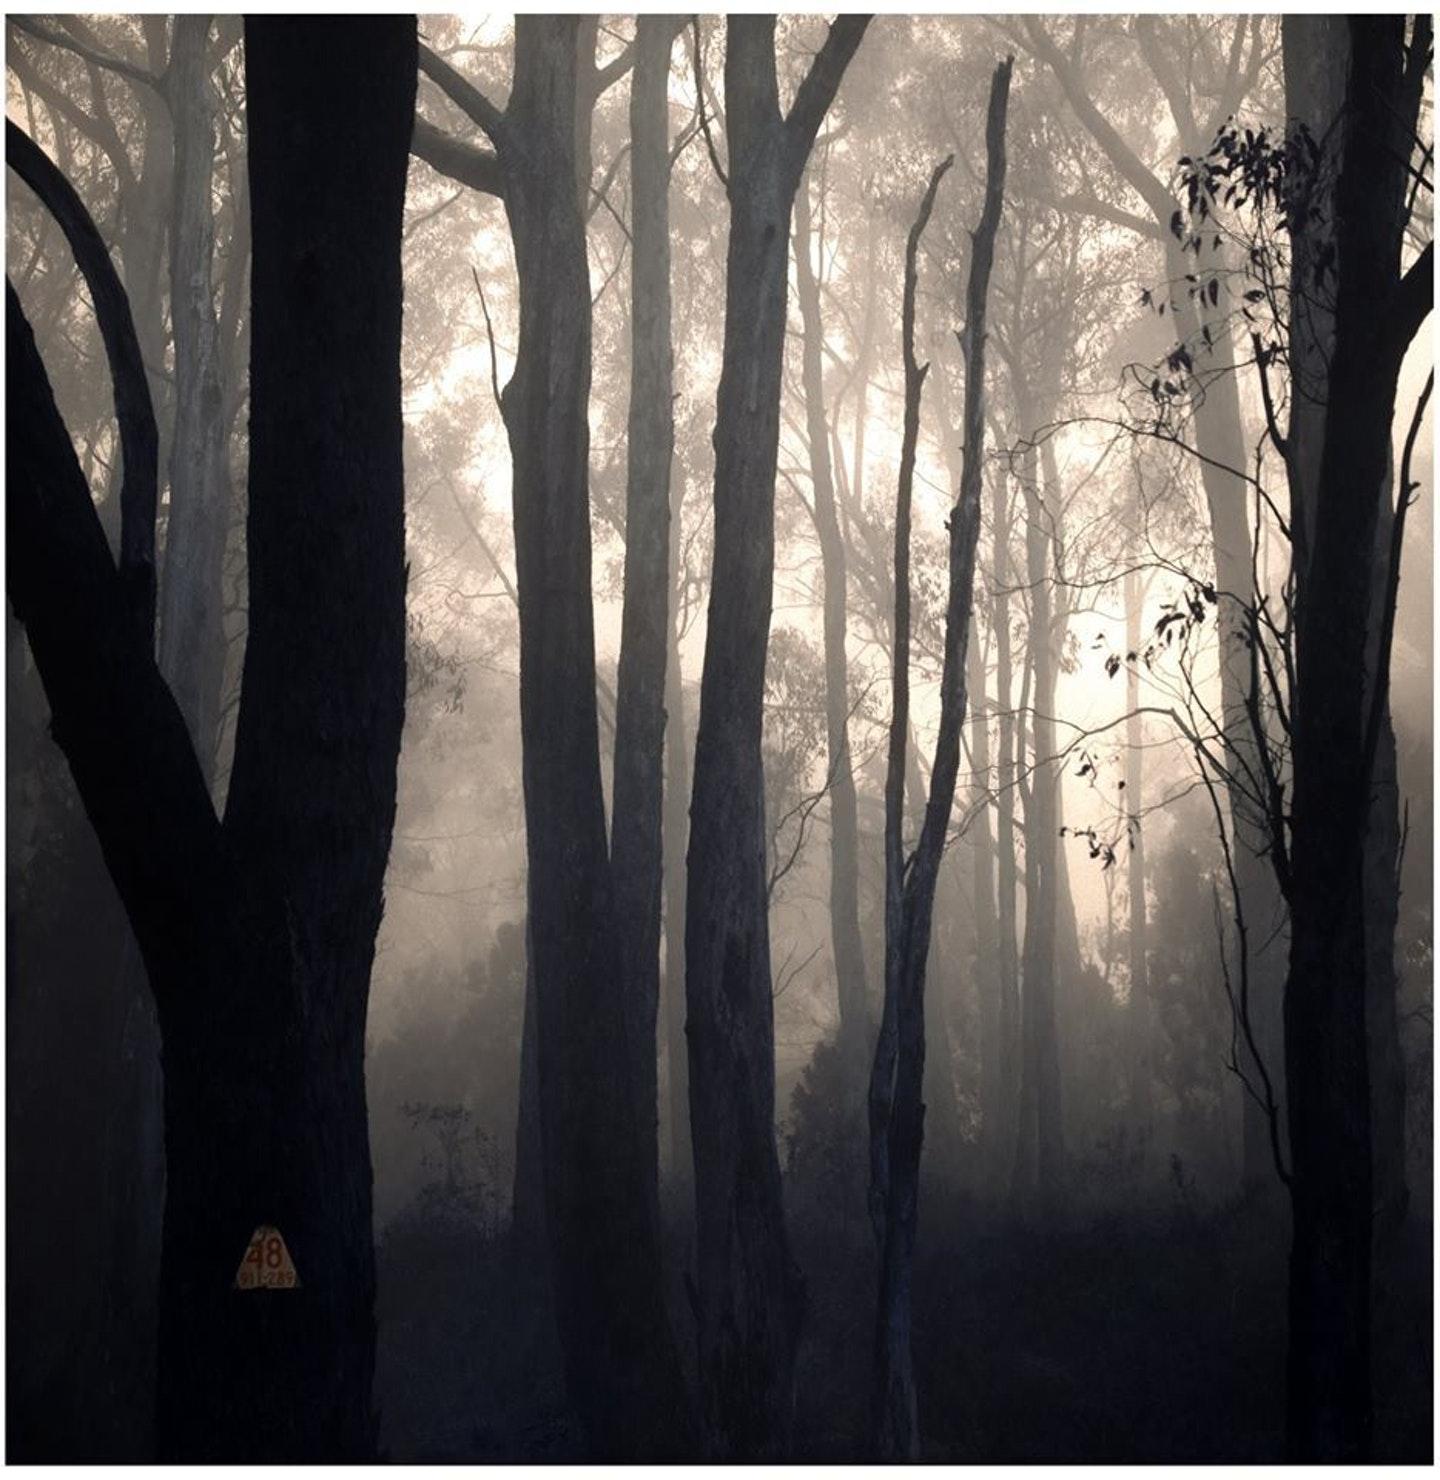 Fine art photographic print. Sold unframed. Limited edition - the first of 3.

Trees in the Cleland National Park, South Australia, cloaked in fog. 

ALEX FRAYNE is a contemporary South Australian photographer, primarily working in analogue film